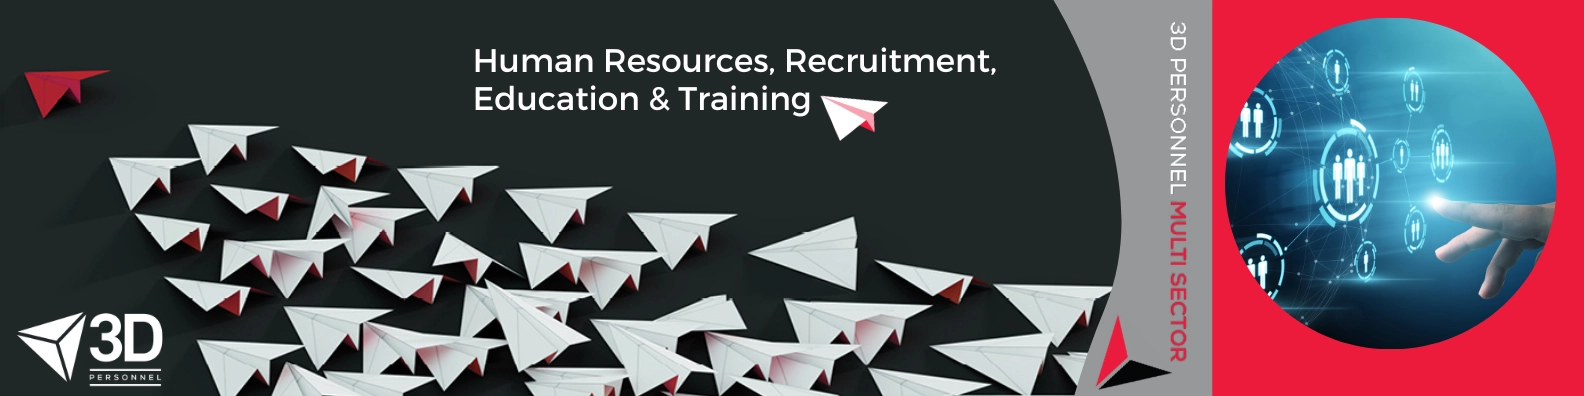 Human Resources, Education & Training graphic